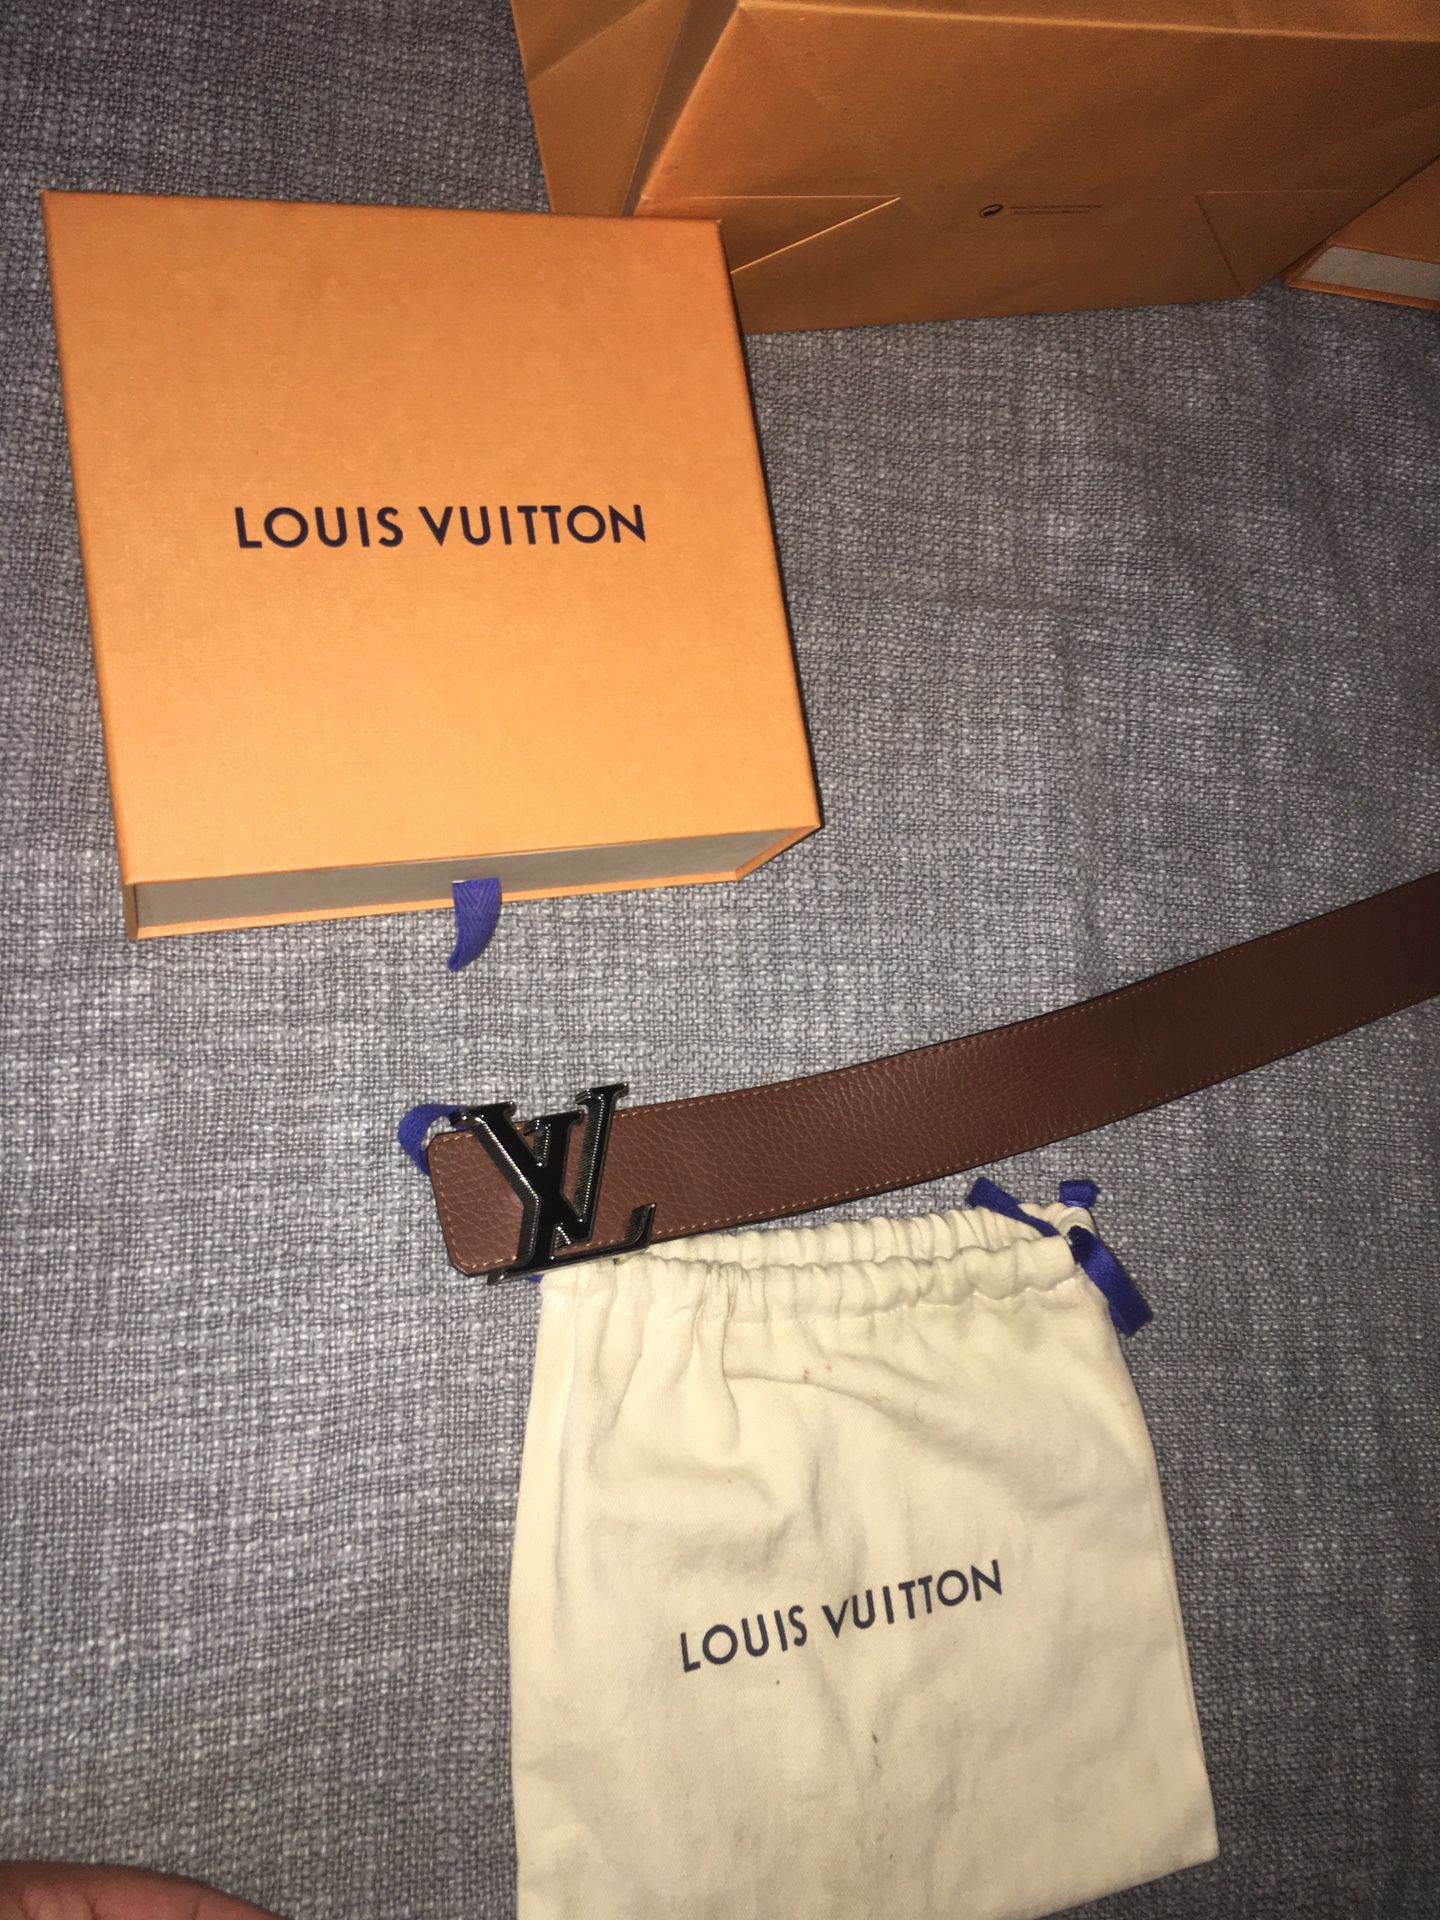 Louis Vuitton Belt Monogram Brown LV Belt Authentic for Sale in Thornwood,  NY - OfferUp